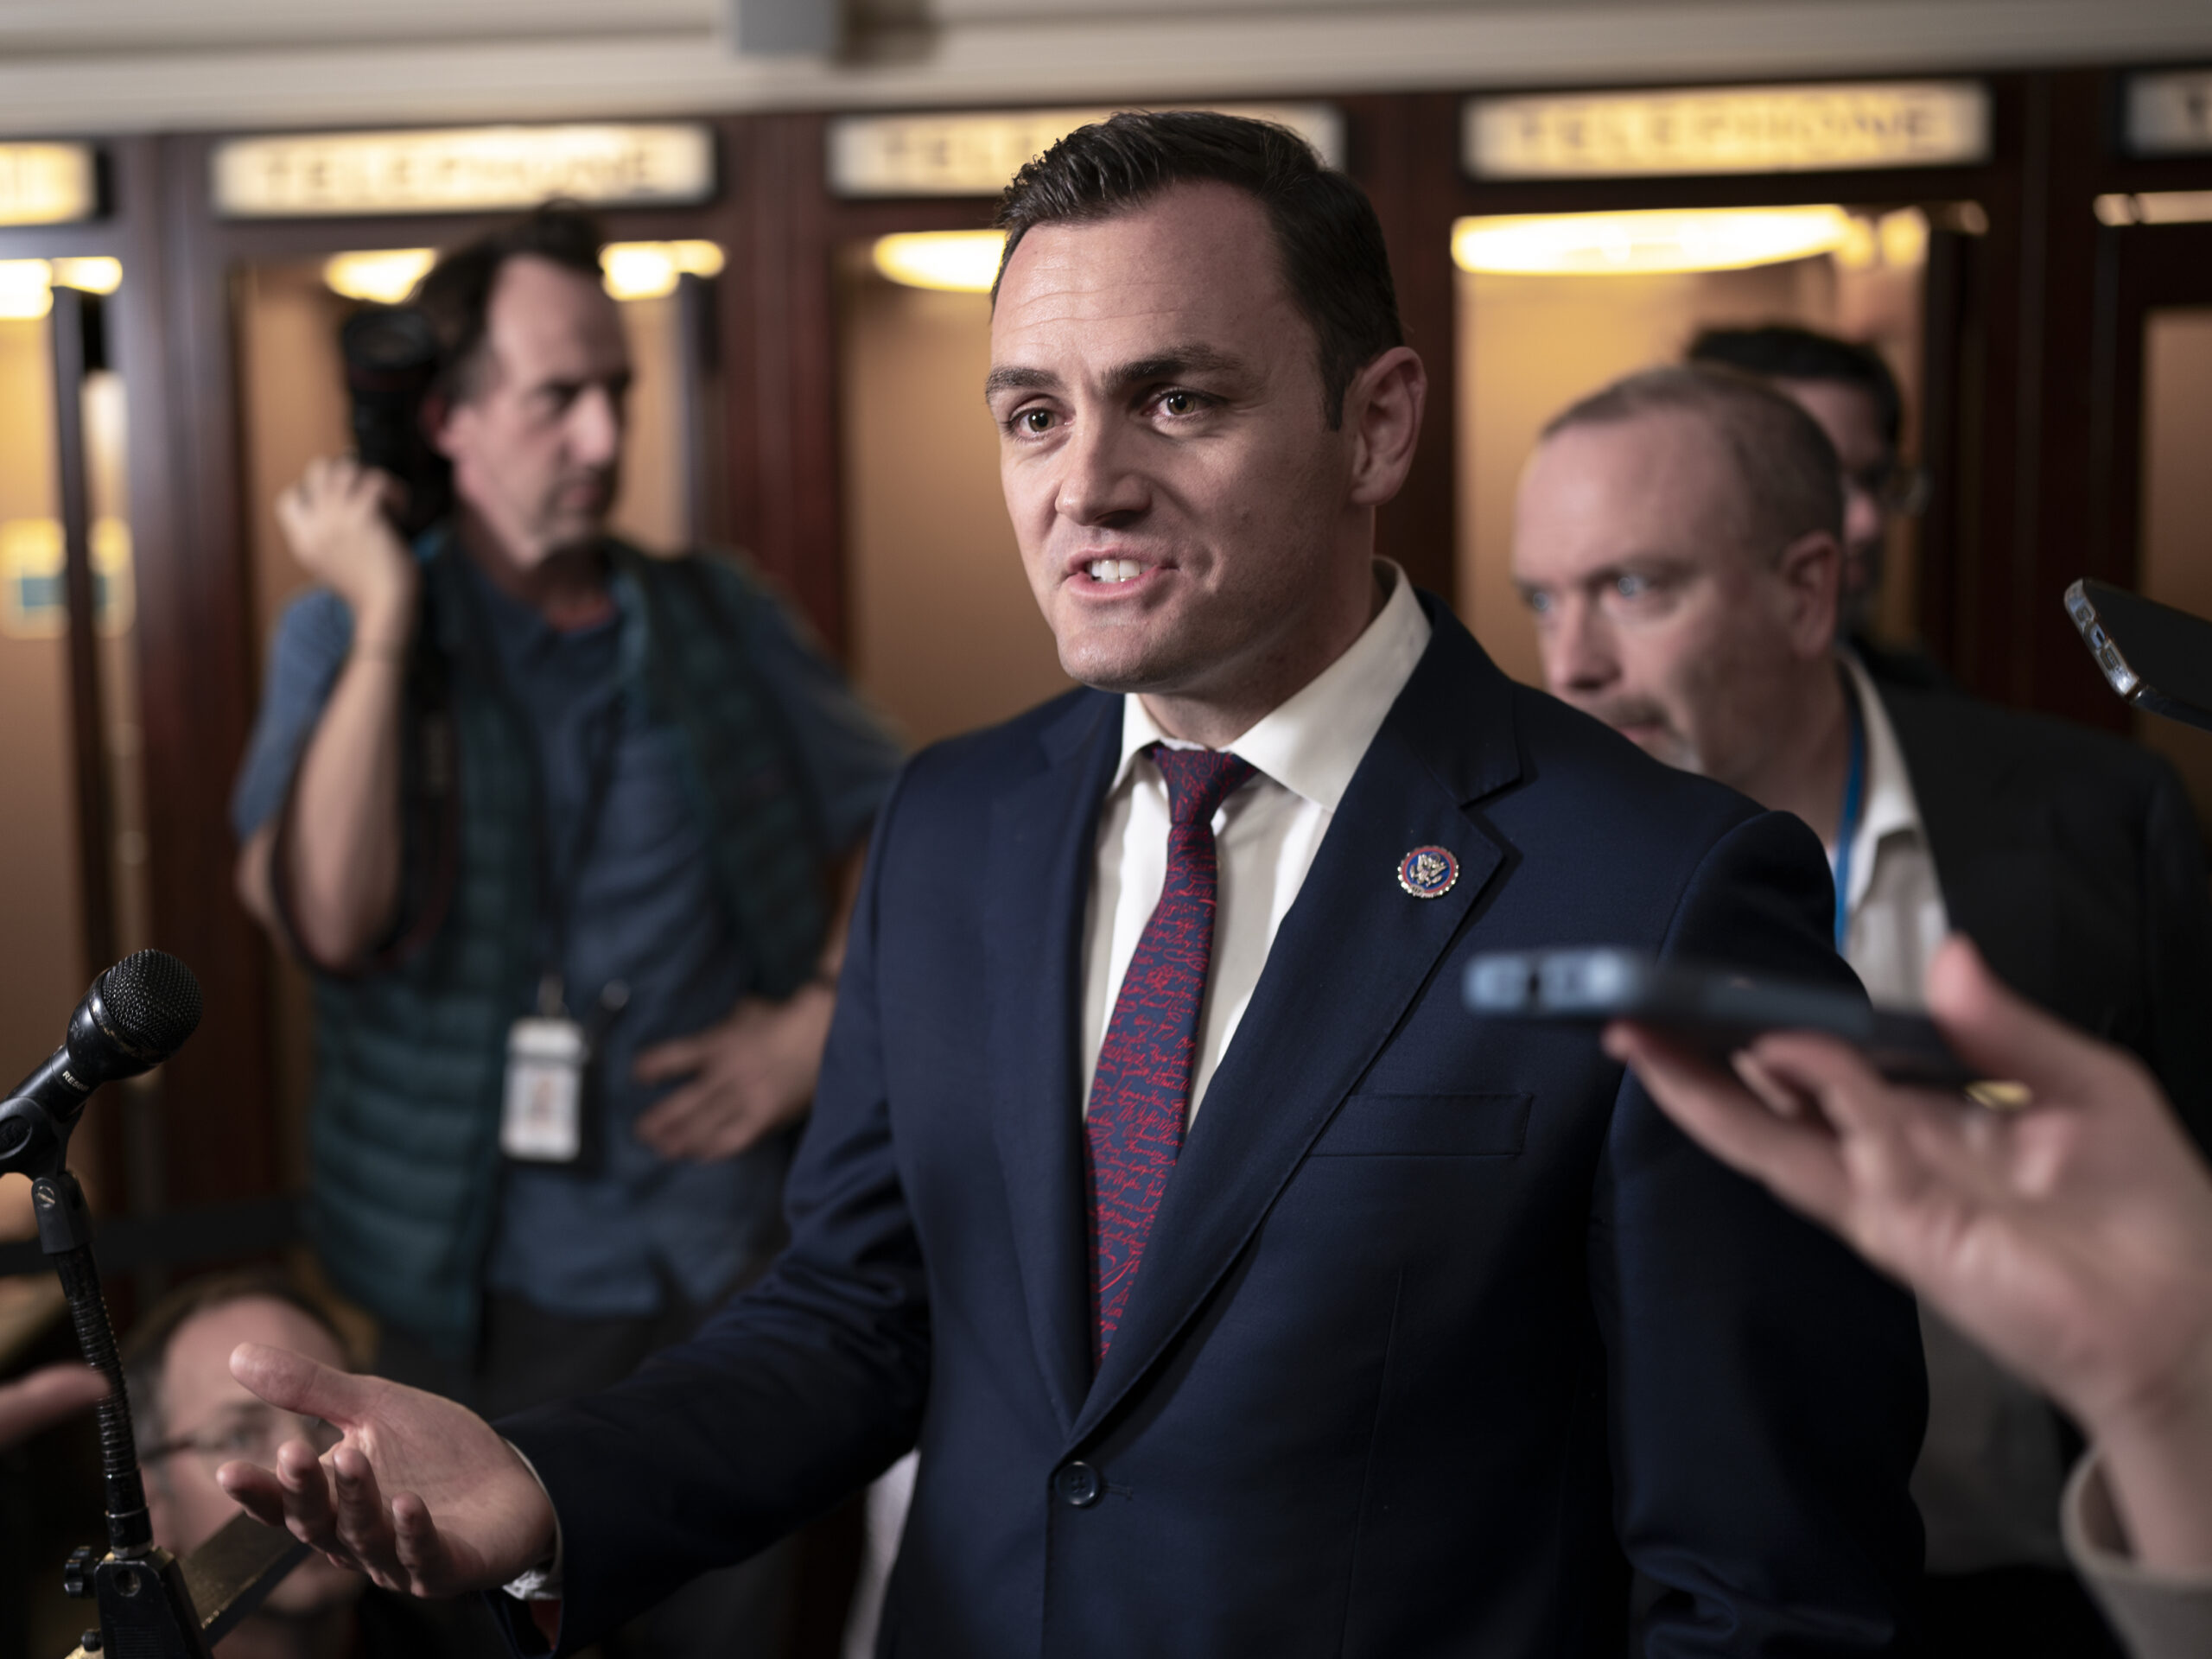 Wisconsin Republican Rep. Mike Gallagher says he won’t run for reelection